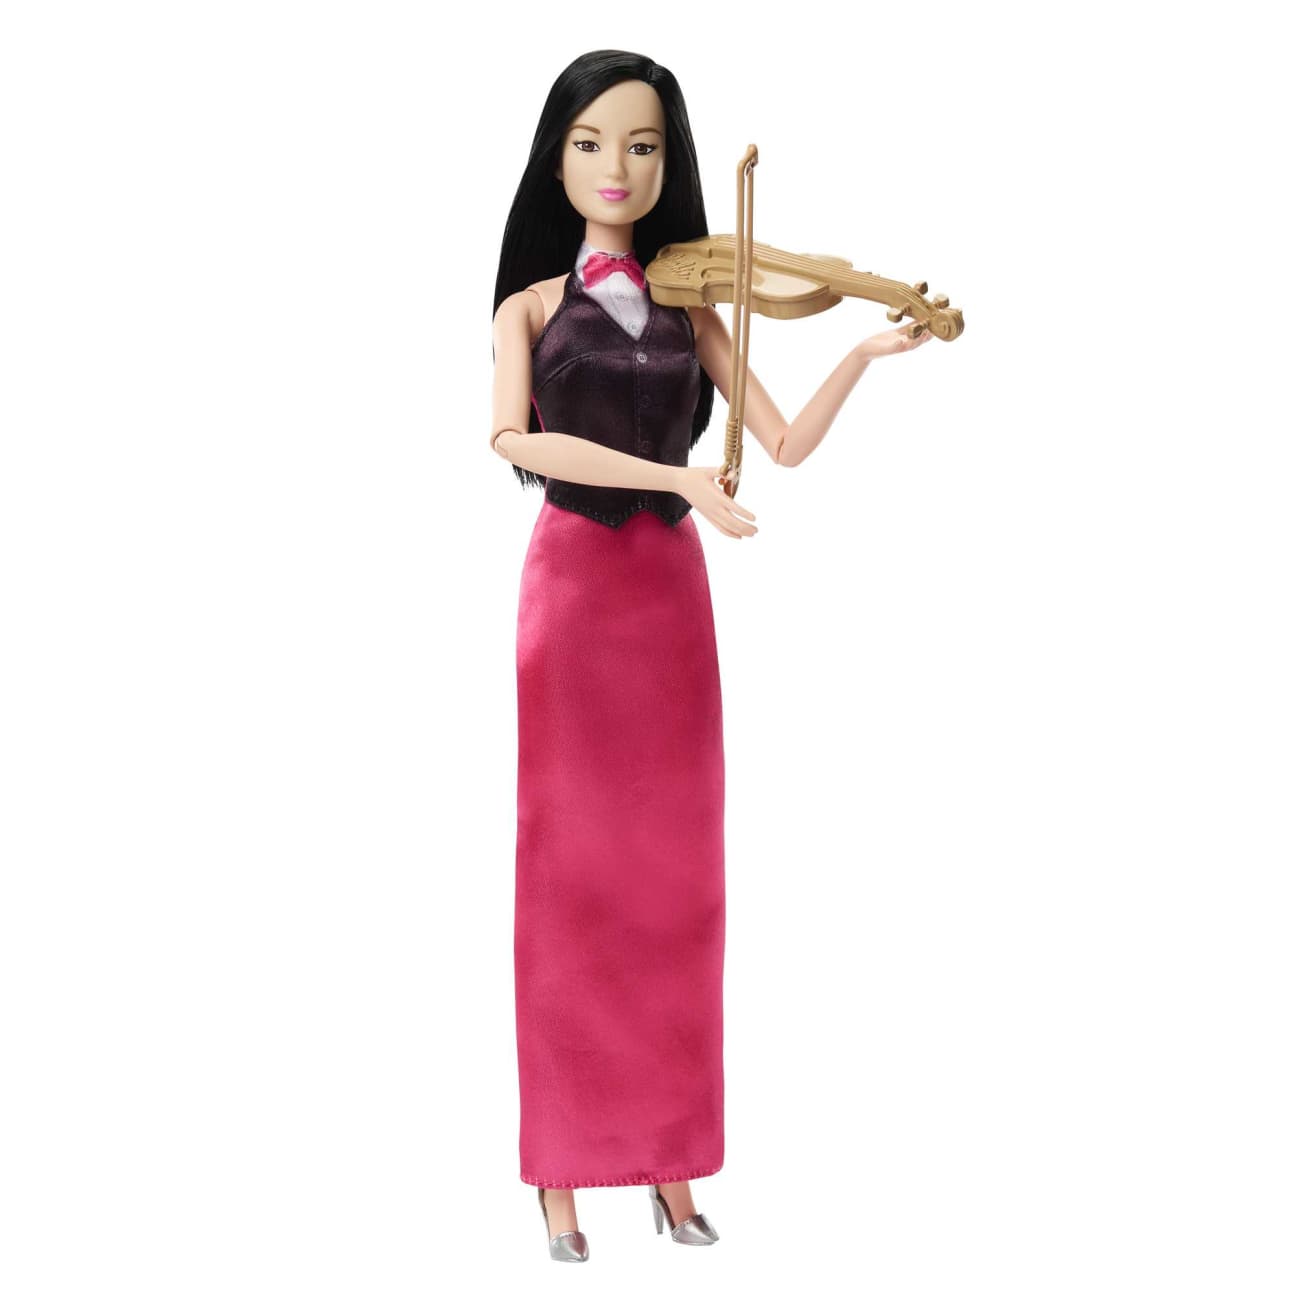 Barbie Doll & Accessories, Career Violinist Musician Doll by Mattel -Mattel - India - www.superherotoystore.com